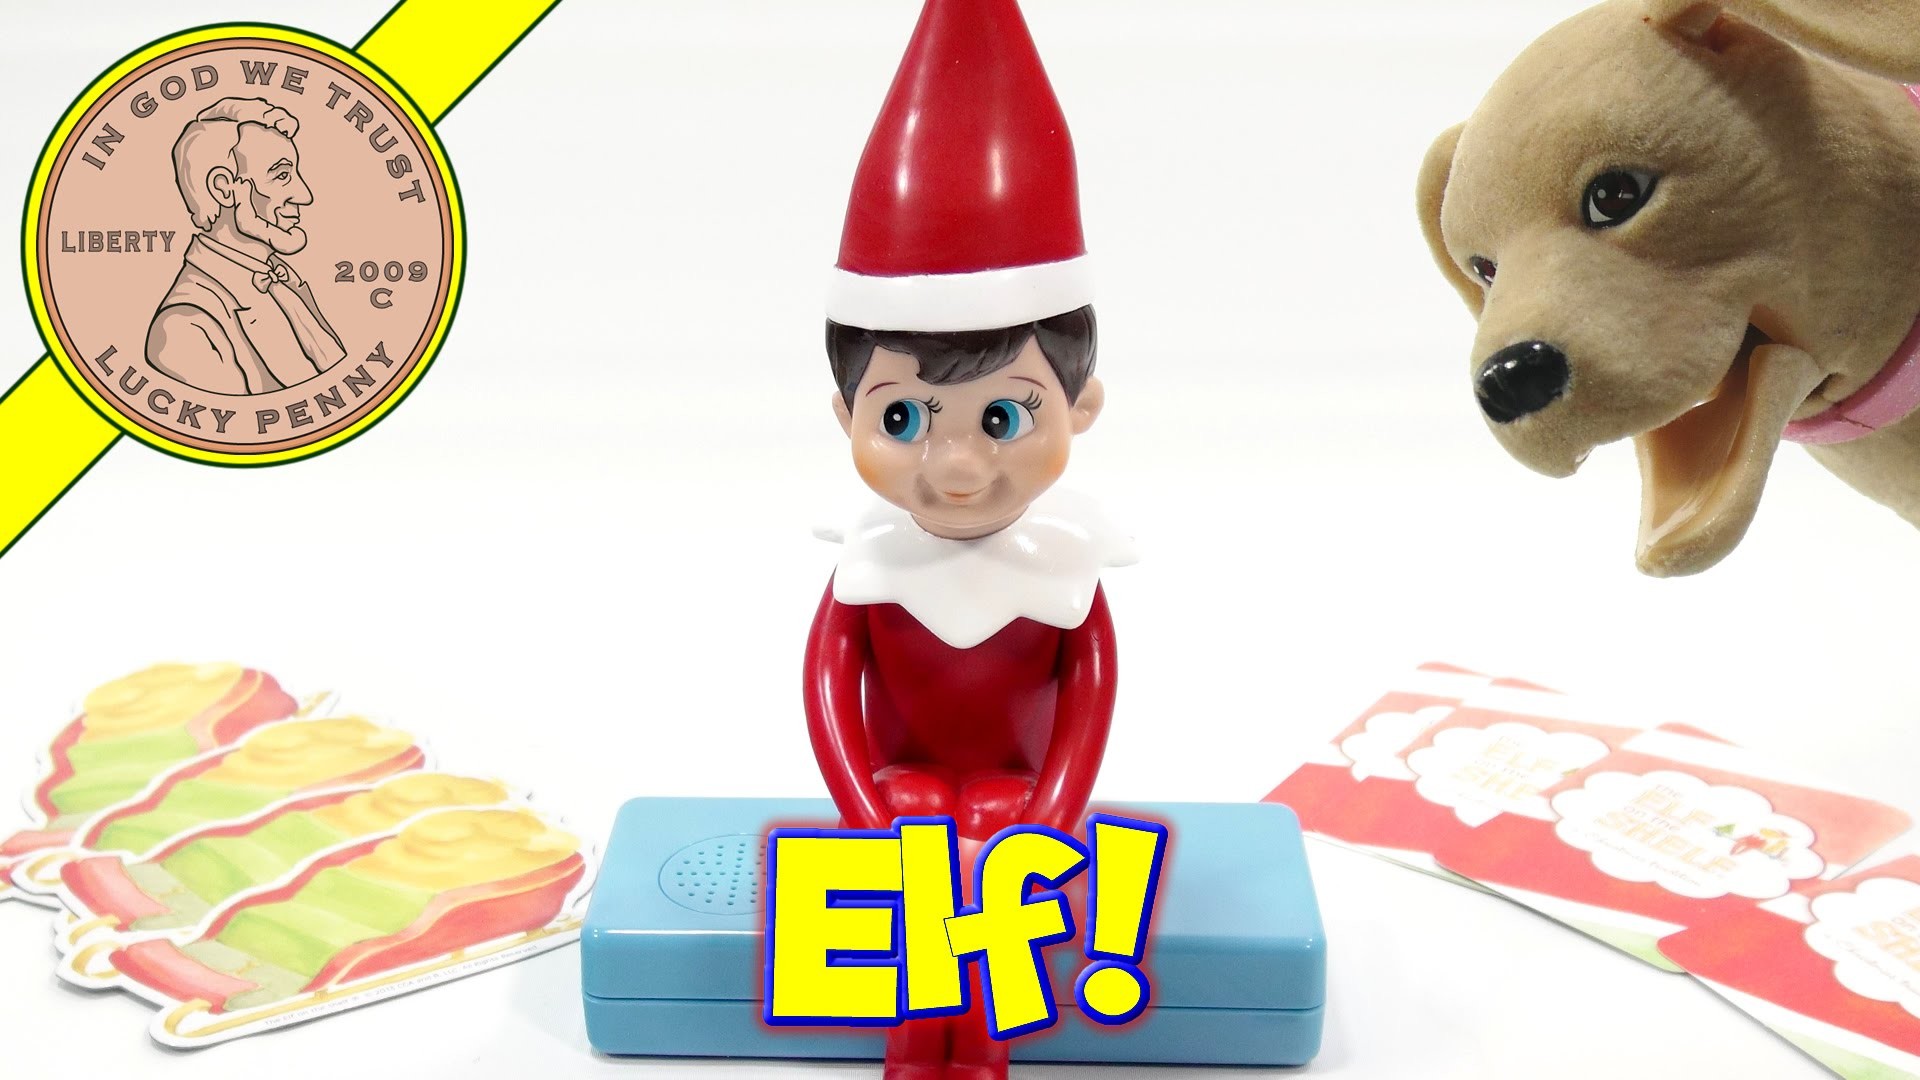 1920x1080 the Elf on the Shelf a Christmas Tradition Family Game - Butch On The Hunt!  - YouTube